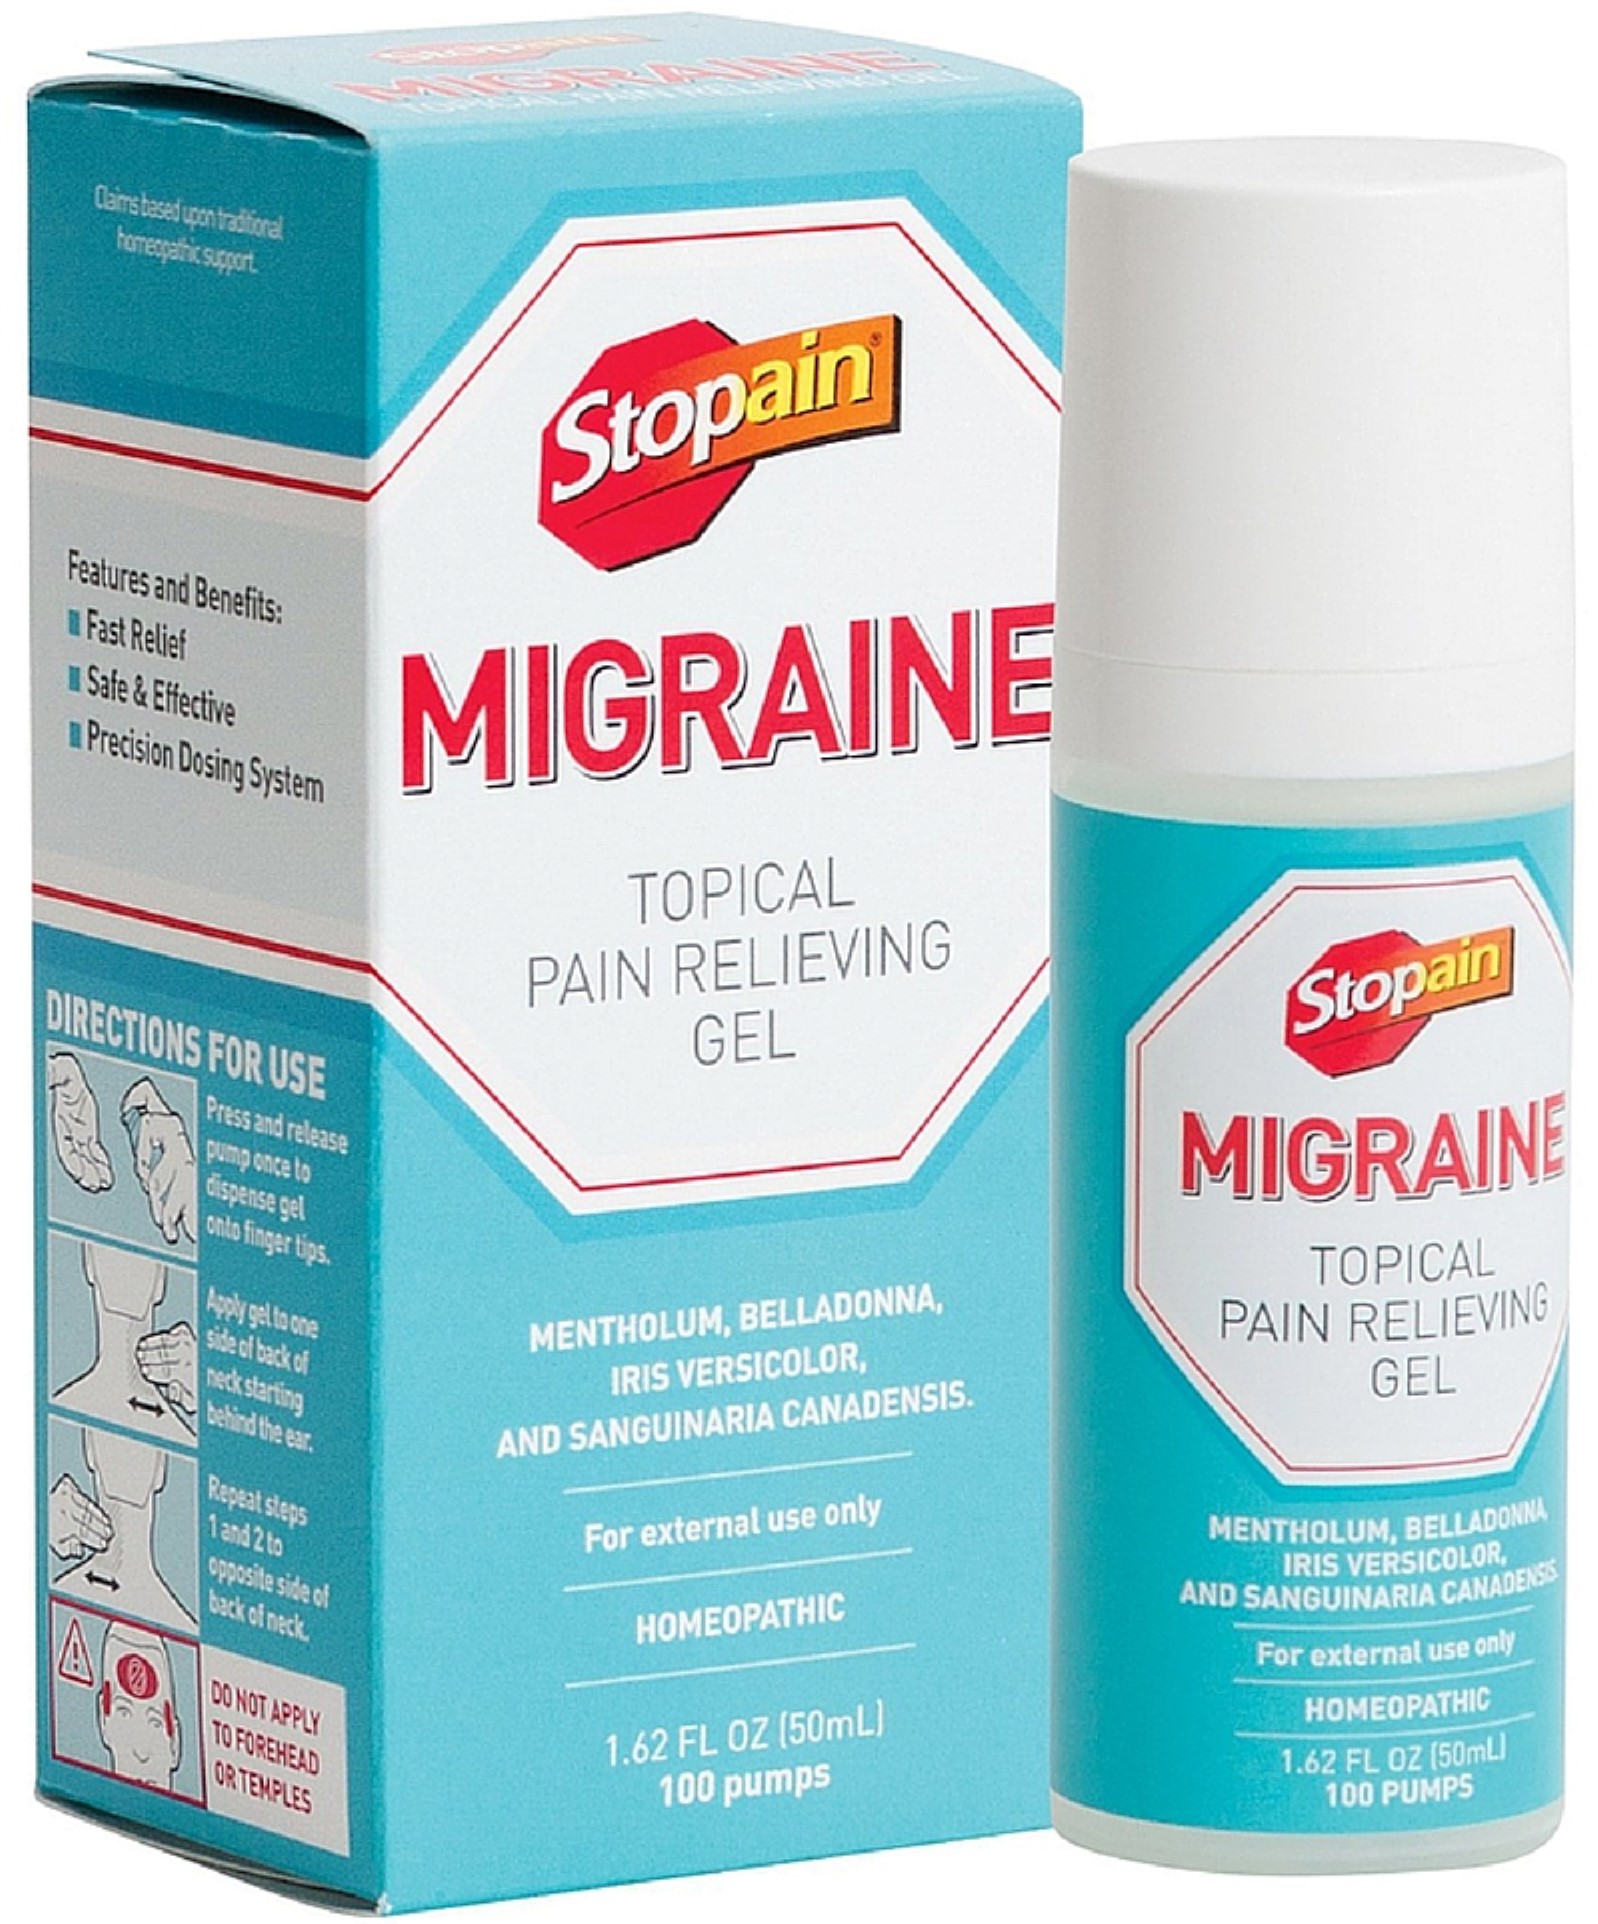 Stopain Migraine Topical Pain Relieving Gel 1.62 oz (Pack of 3) - image 1 of 2